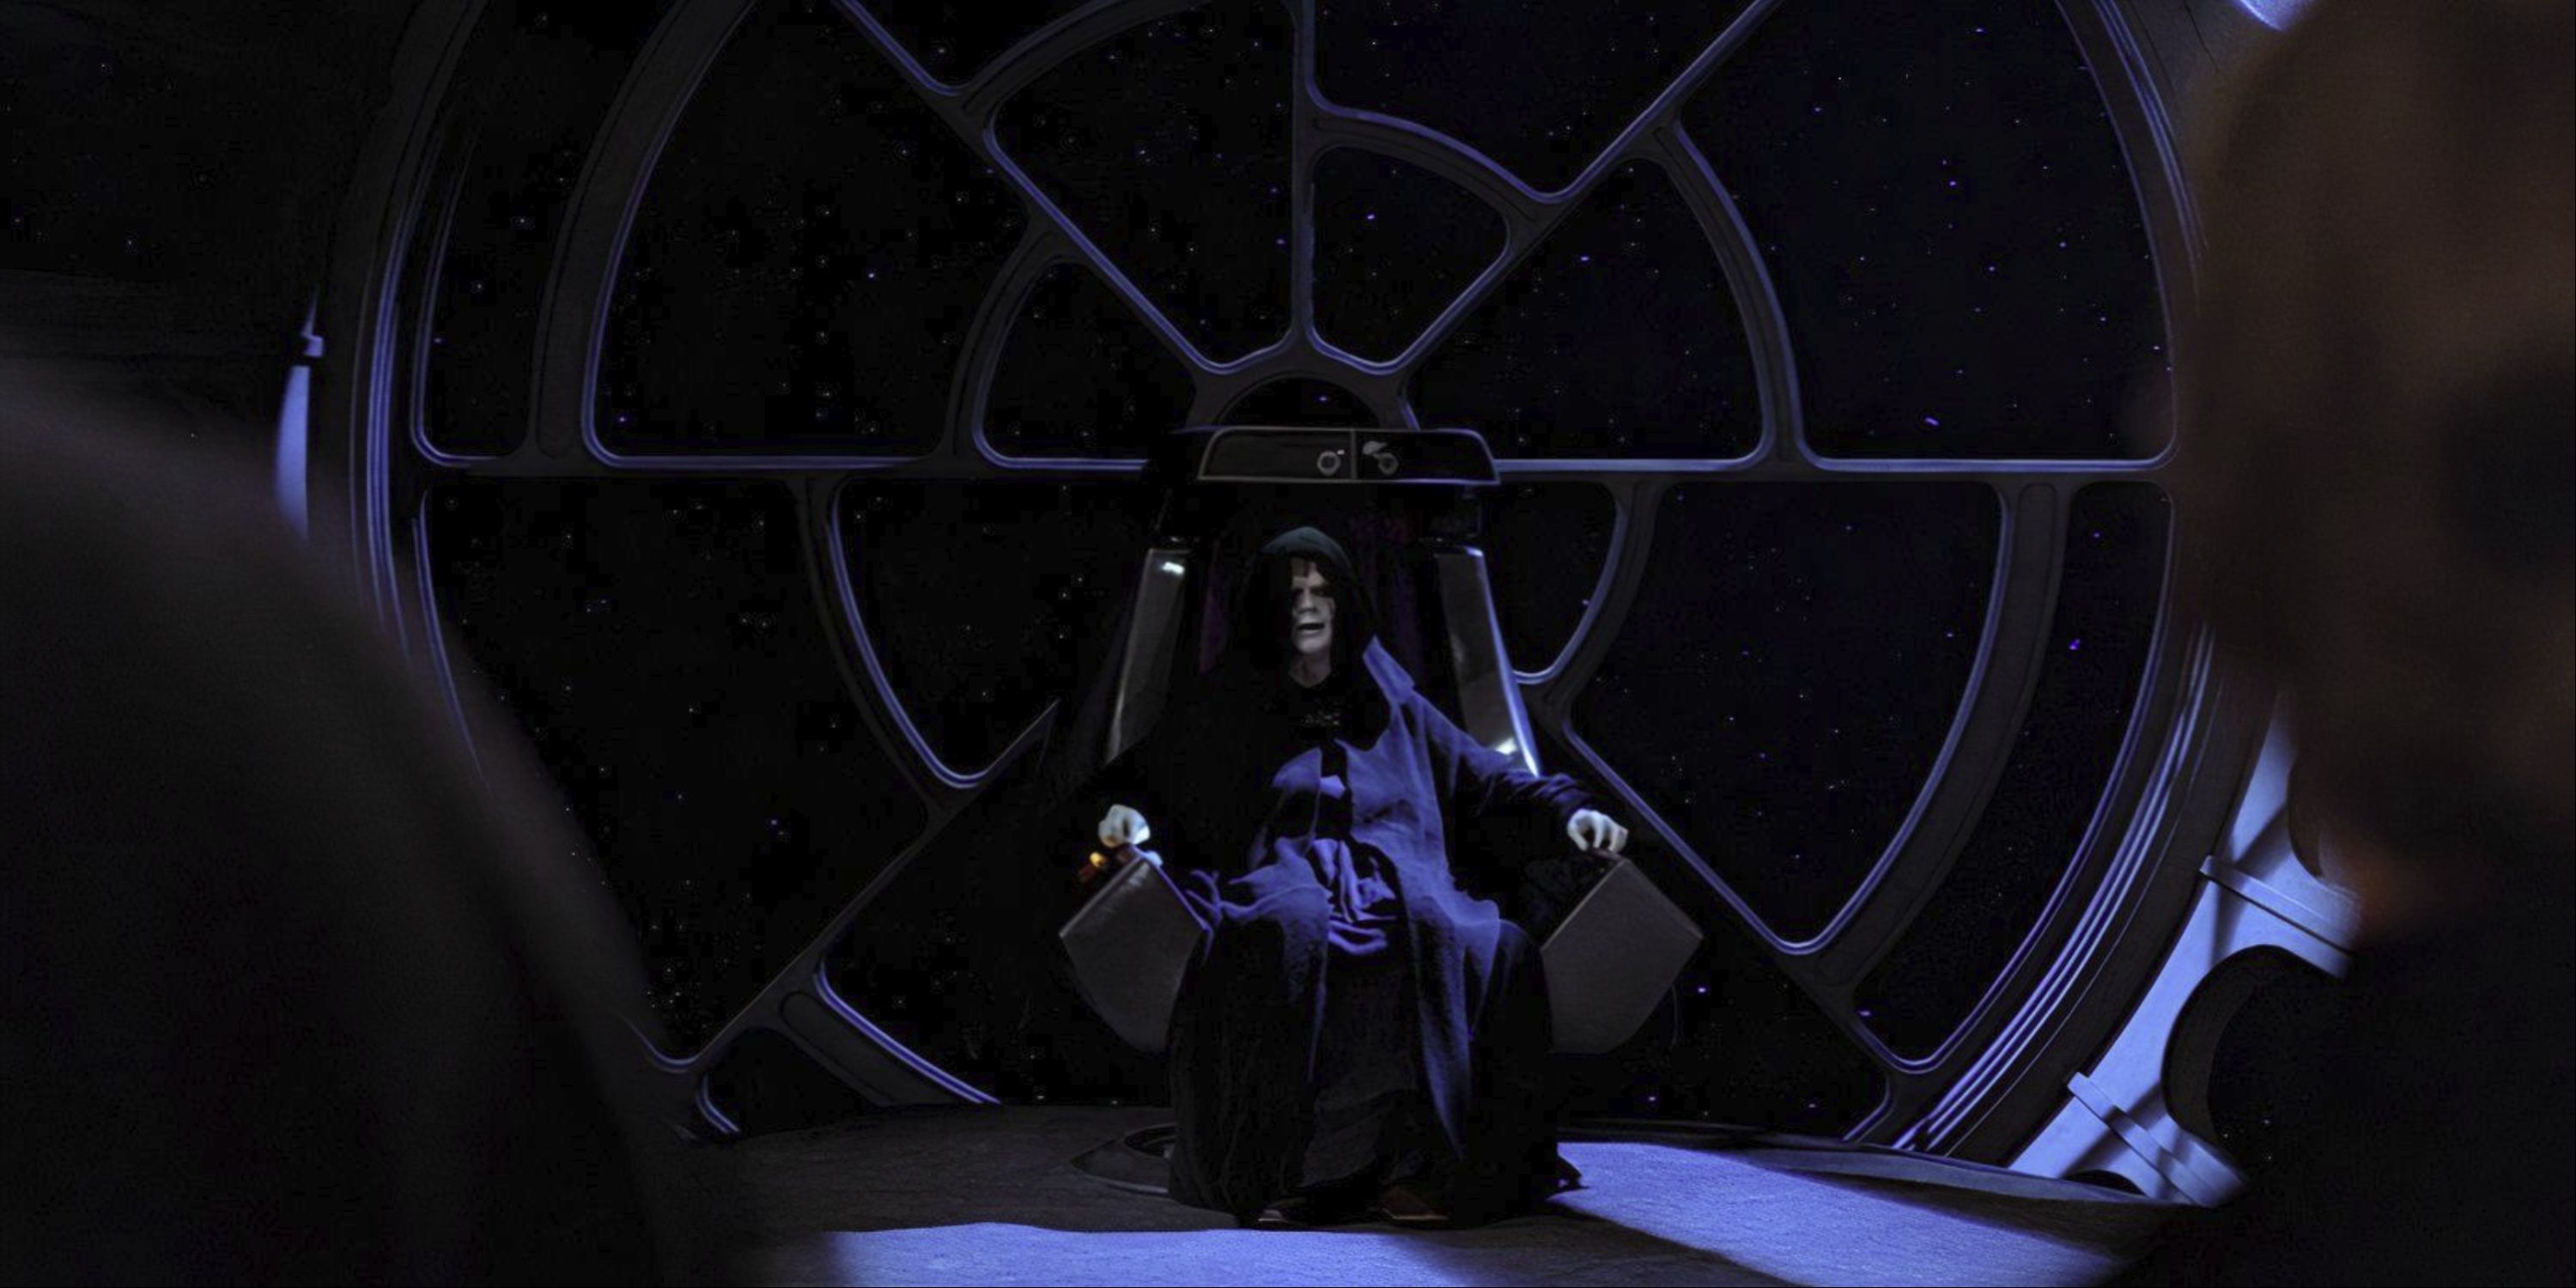 Palpatine sits atop his throne in the Death Star, facing Vader and Luke Skywalker